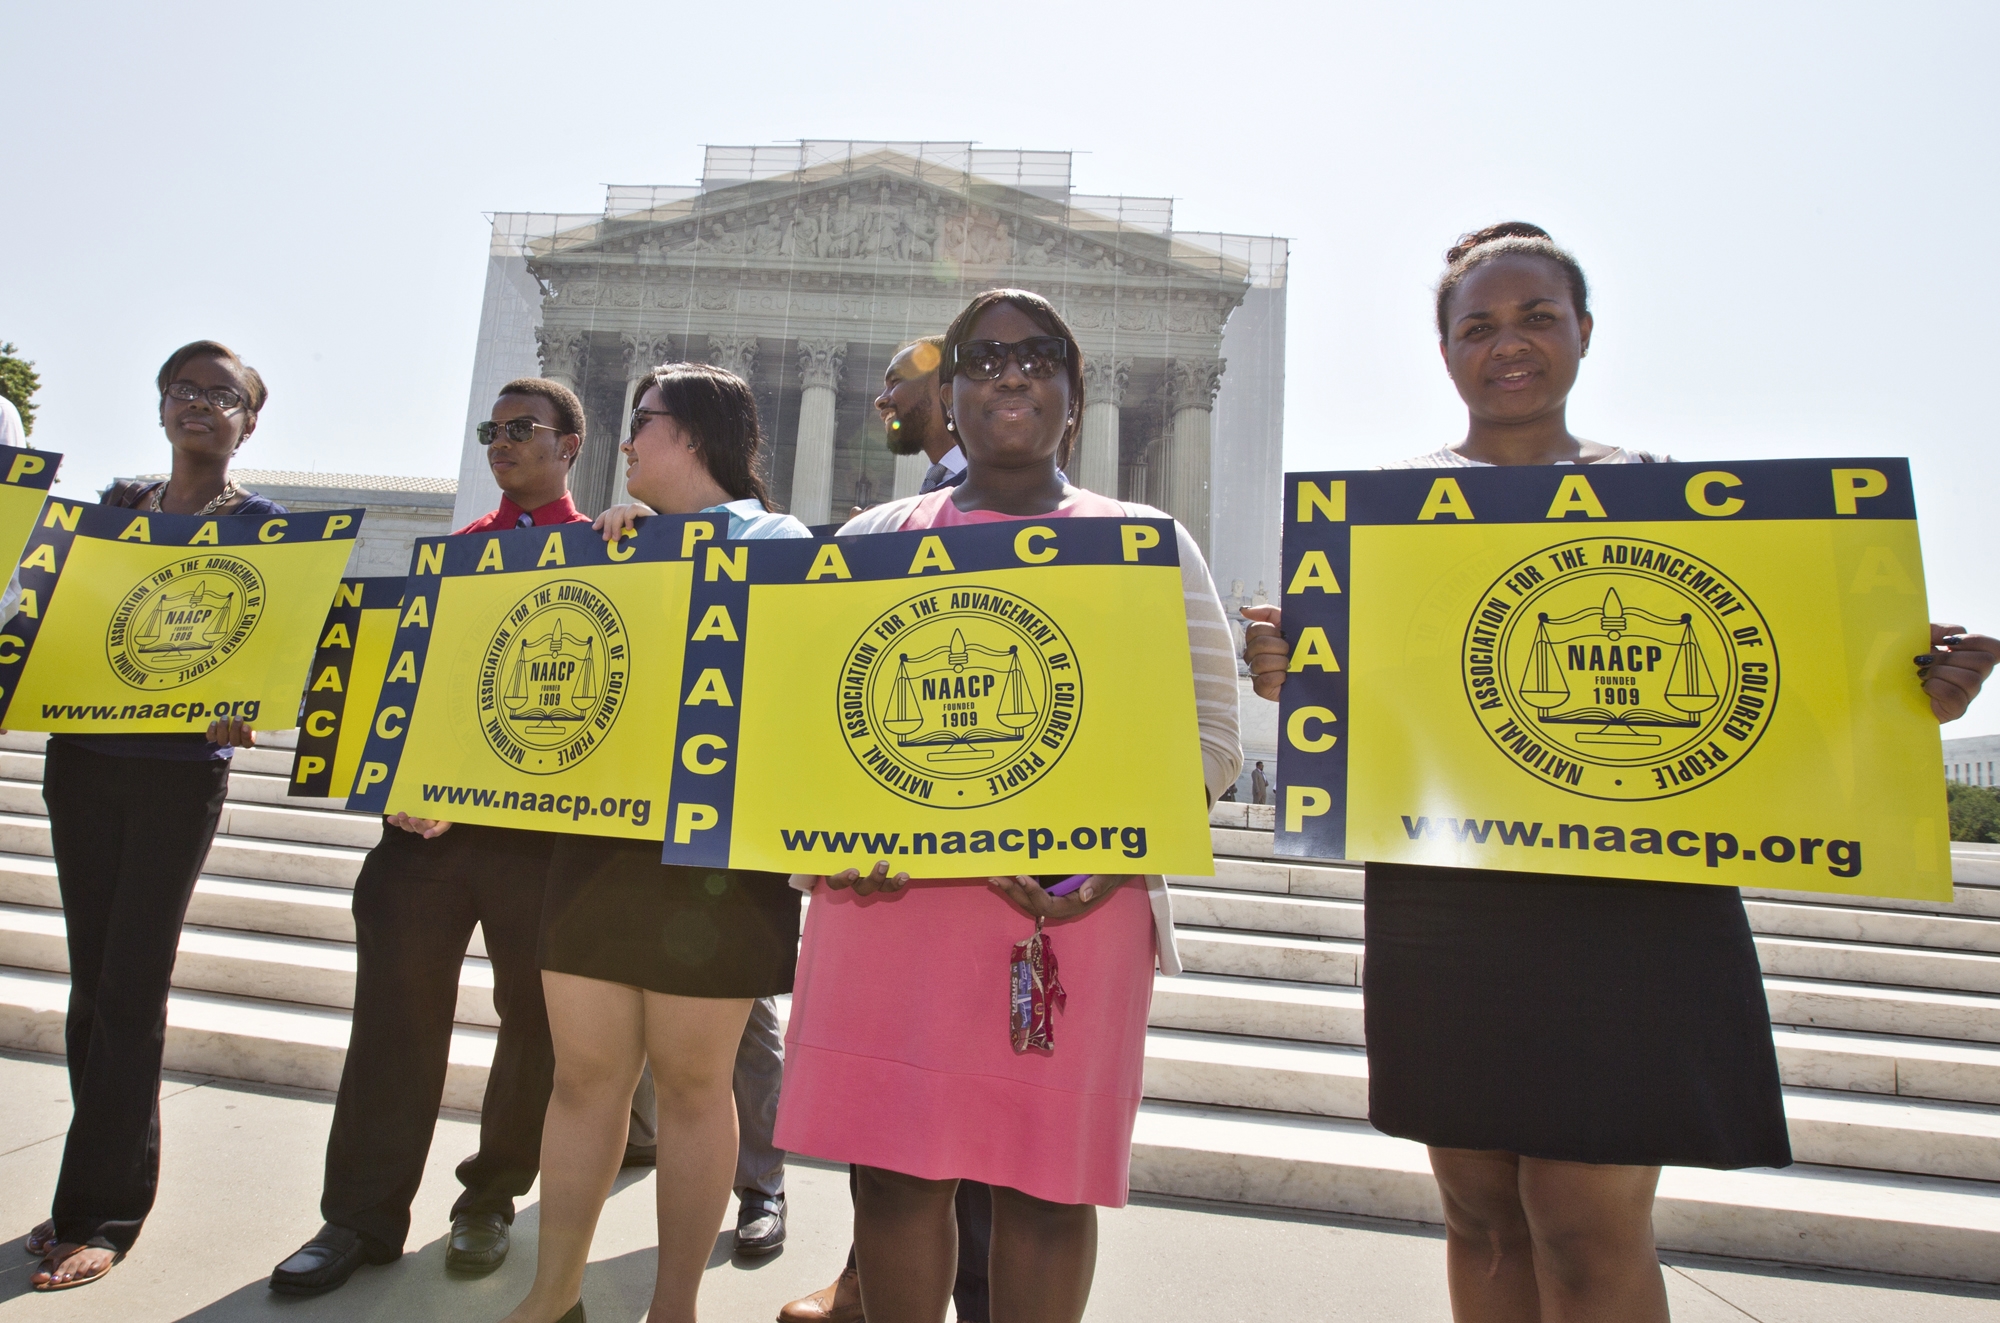 Representatives from the NAACP Legal Defense Fund stand outside the Supreme Court in Washington, on Tuesday, June 25, as the Supreme Court considers <em>Shelby County v. Holder</em>, a voting rights case in Alabama. (AP/J. Scott Applewhite)